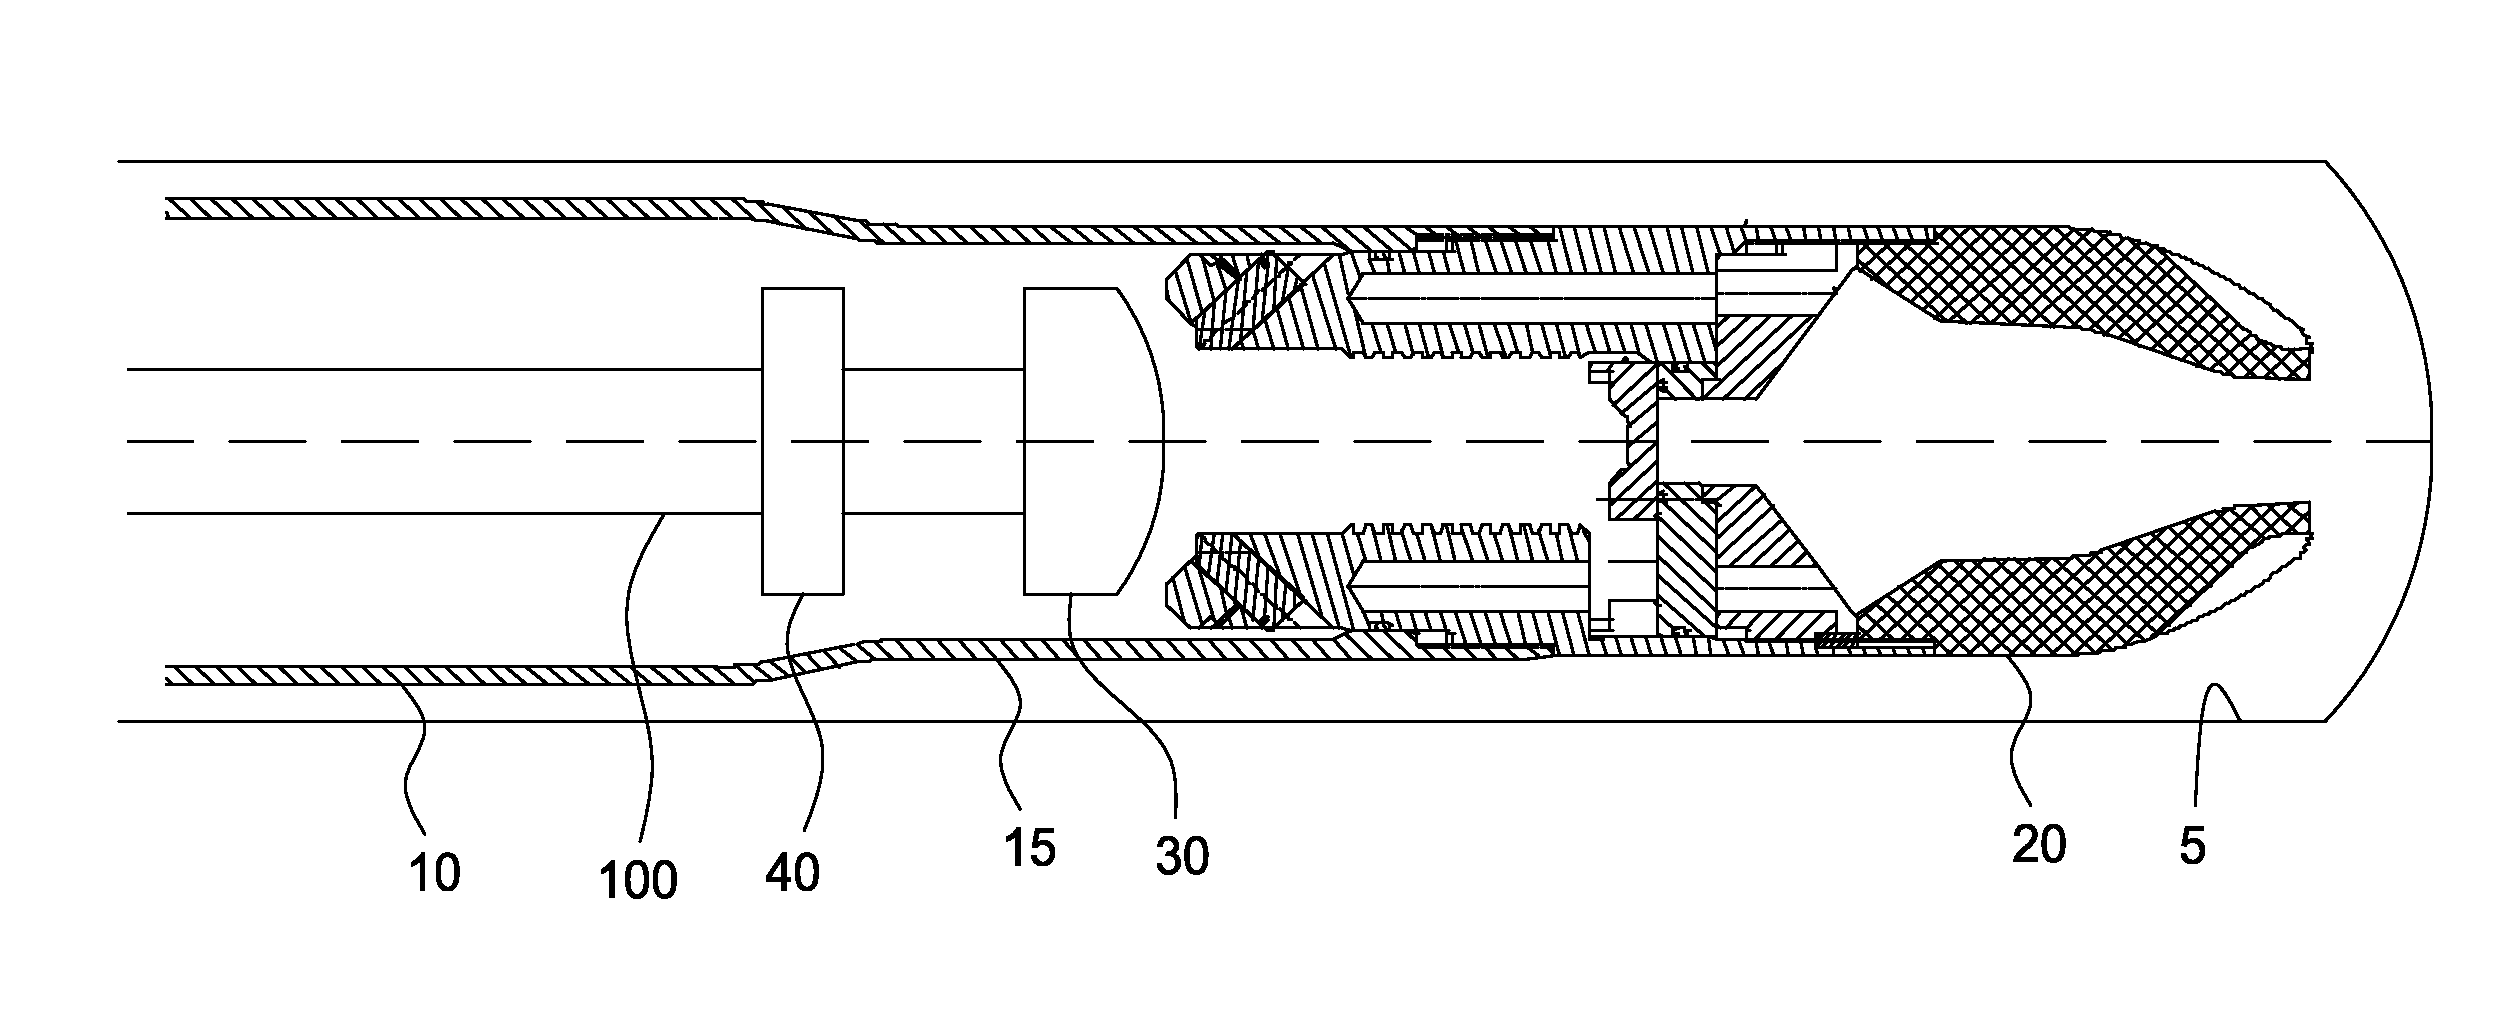 Apparatus and methods of milling a restricted casing shoe